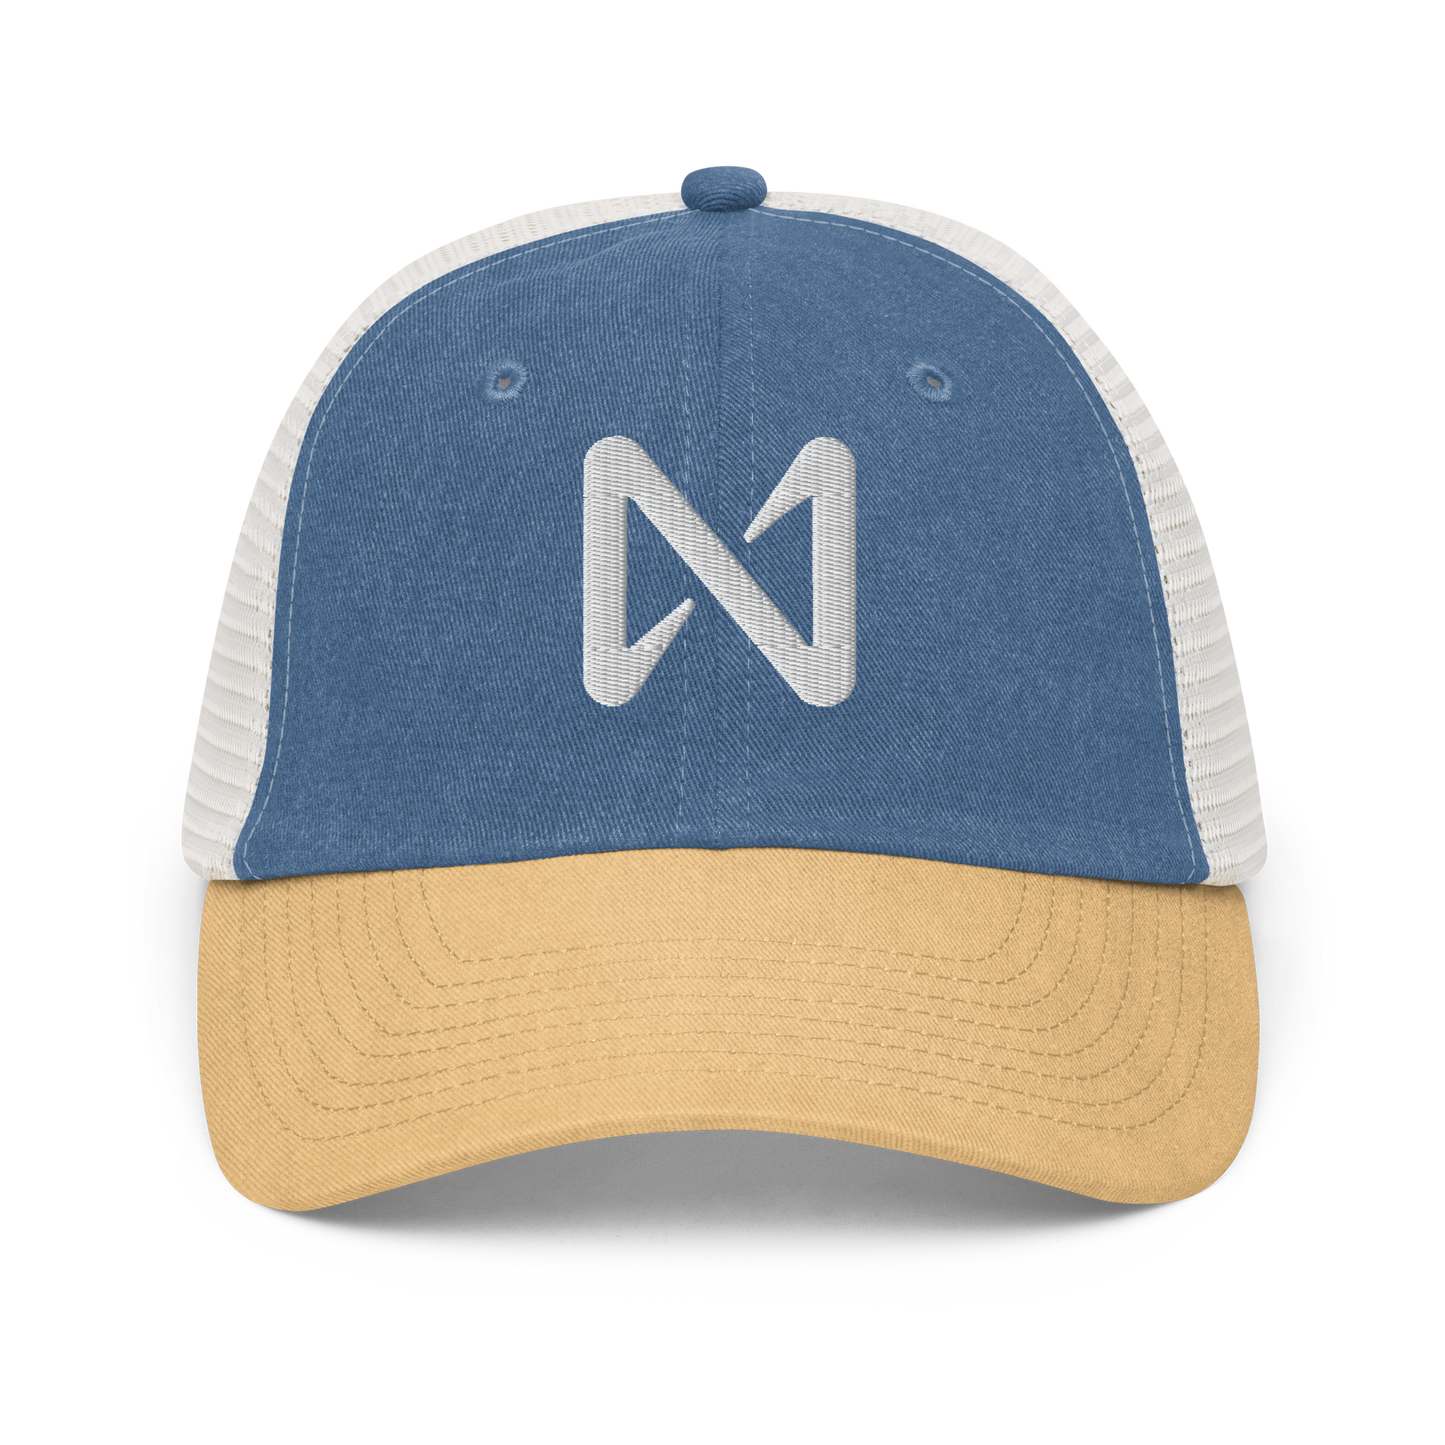 NEAR ICON WHITE EMBROIDERY Pigment-dyed cap